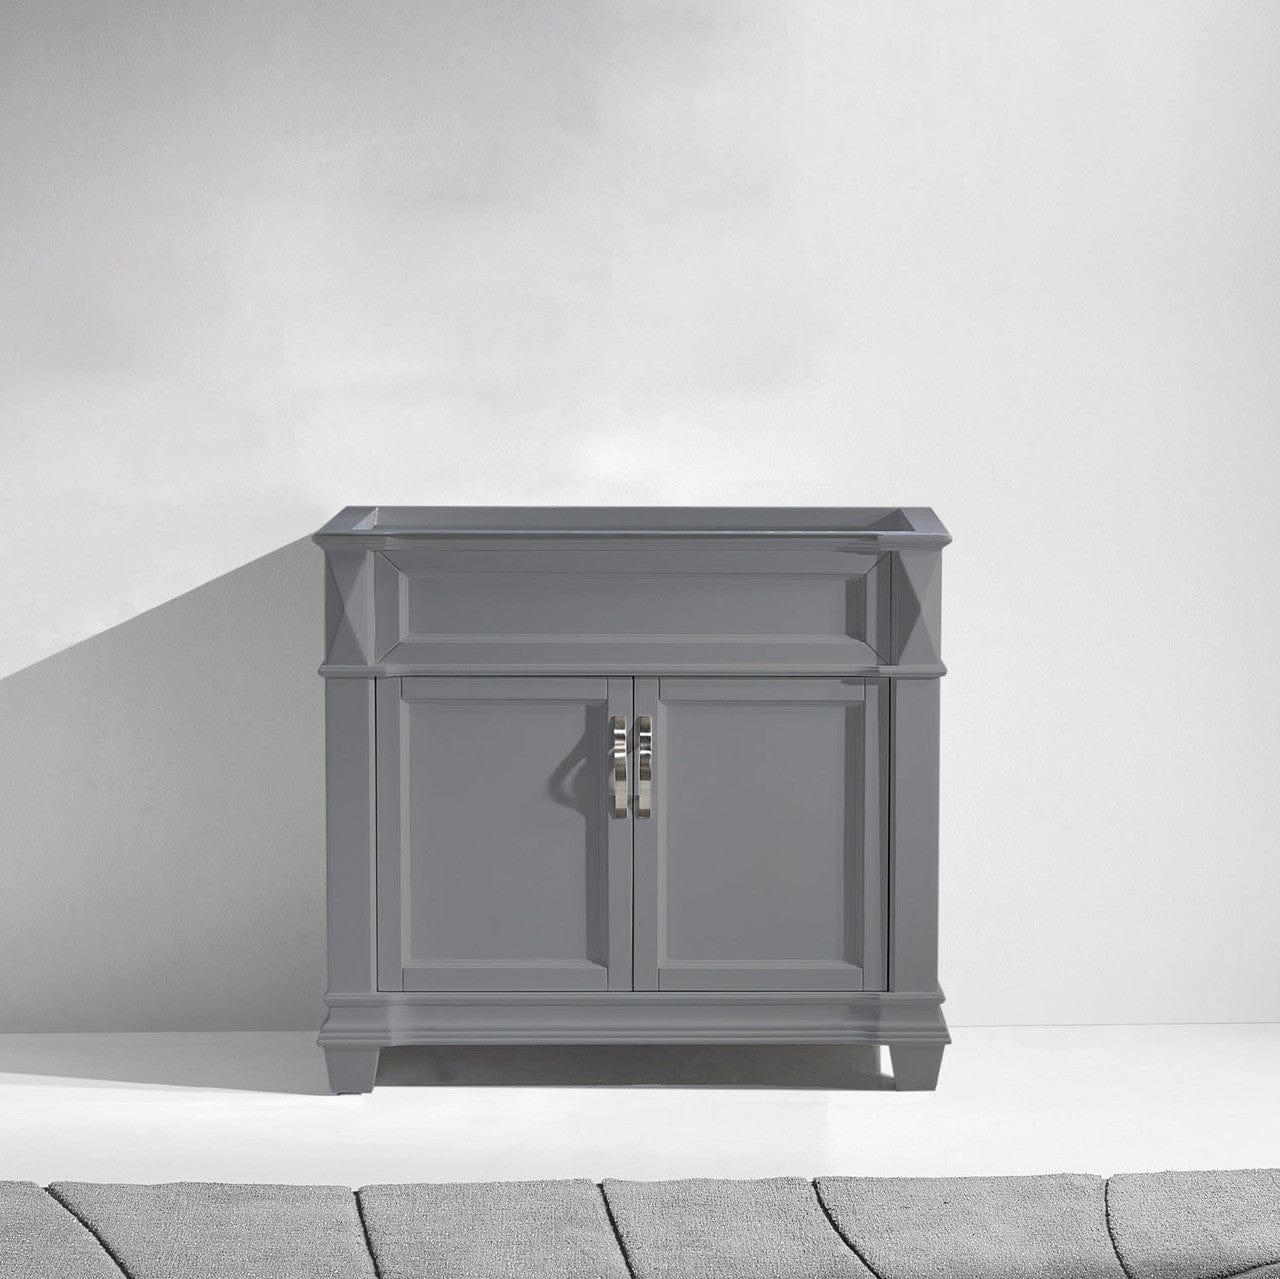 Virtu USA Victoria 36 Cabinet Only in Grey